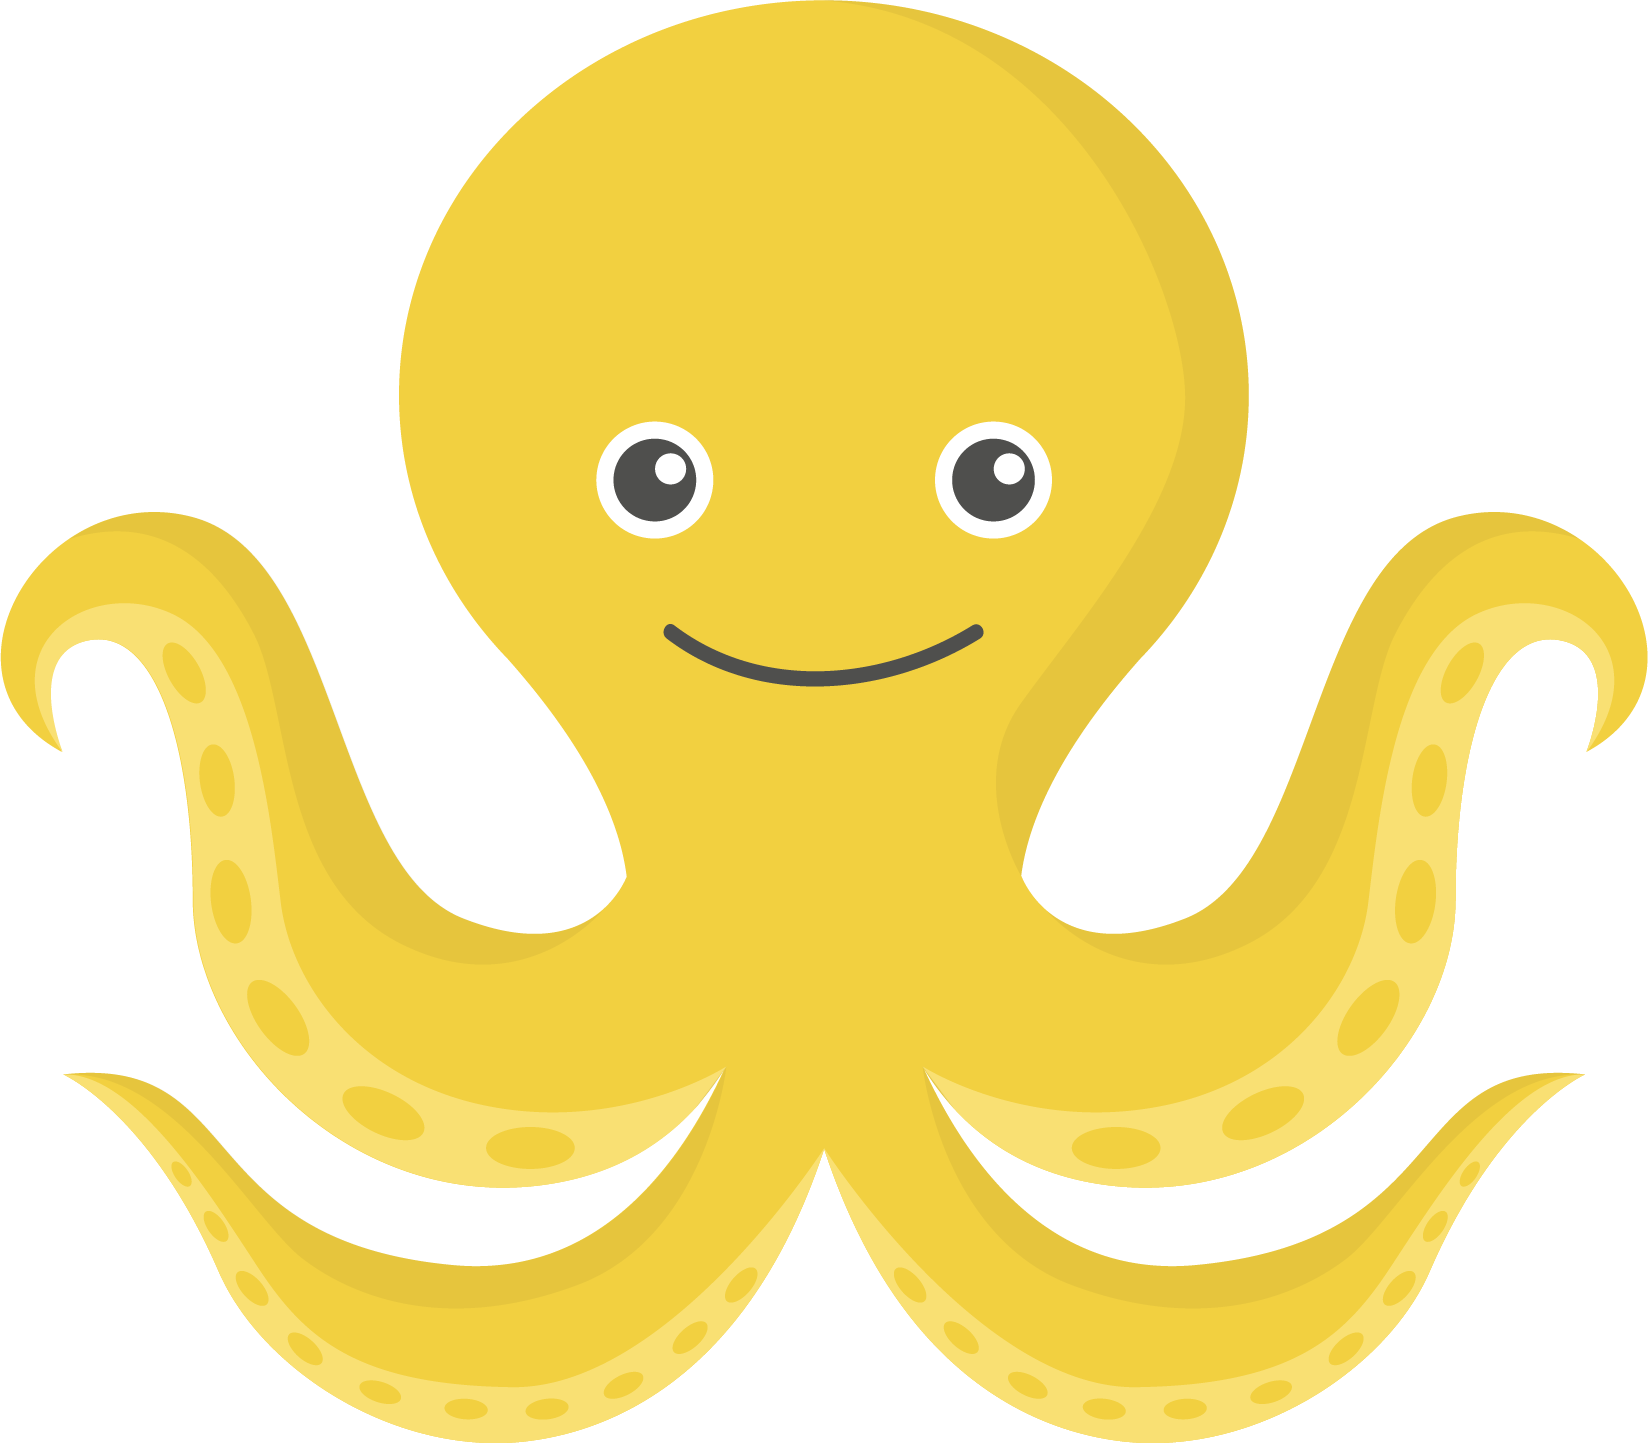 Png transparent free images. Clipart octopus yellow